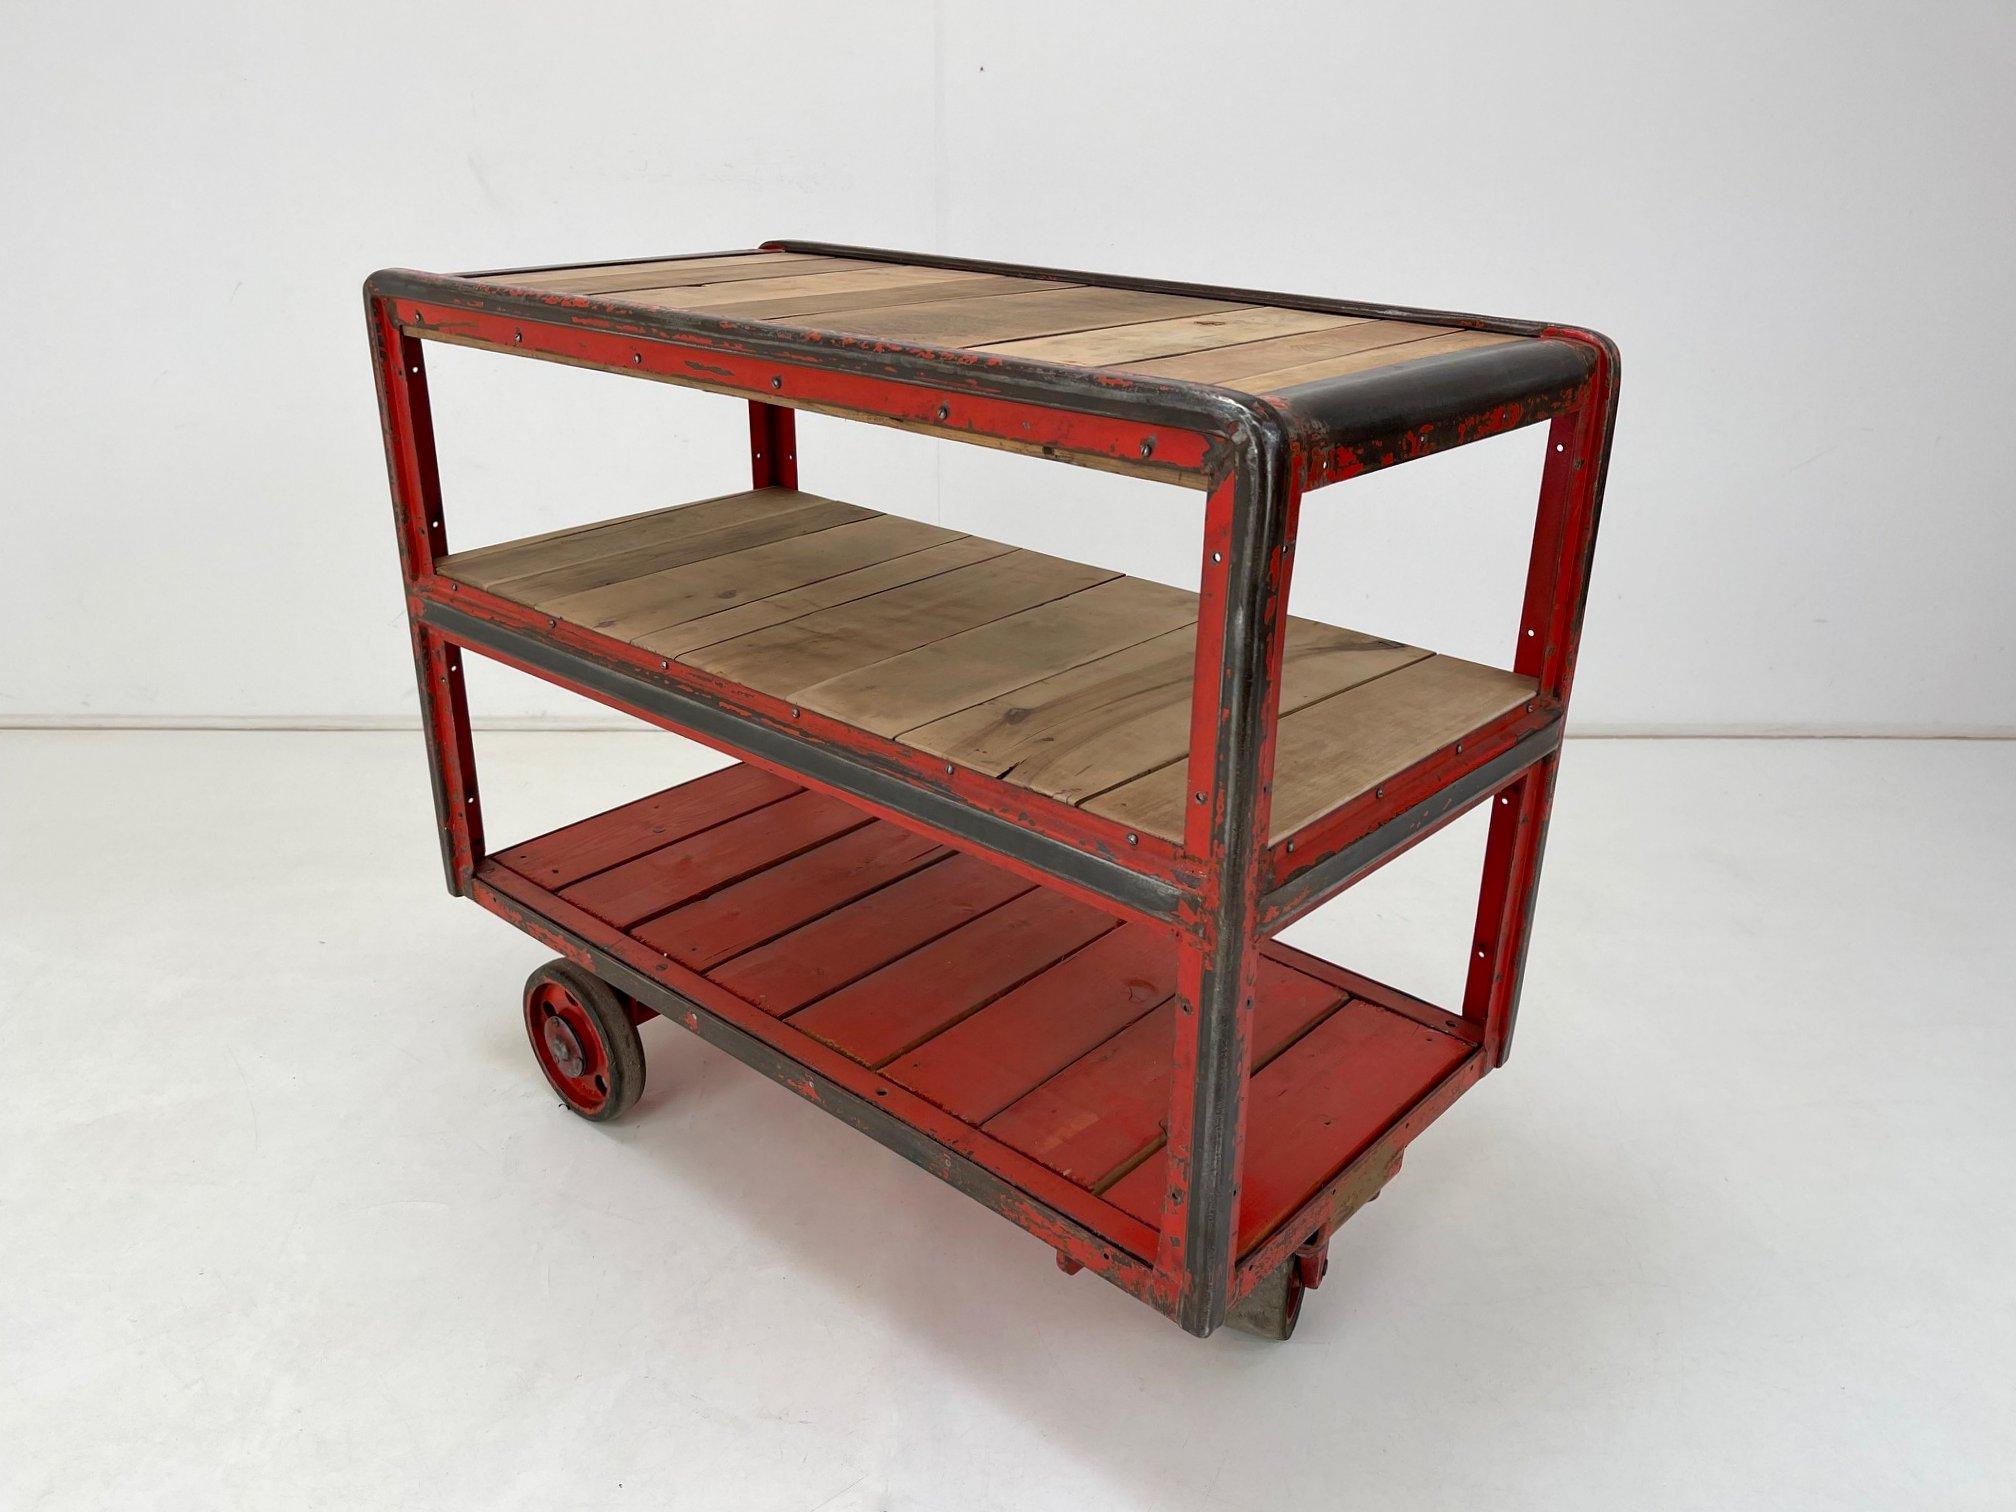 Beautiful vintage industrial cart with original red paint from an old factory in Czechoslovakia. All parts are original. The wooden parts were sanded.